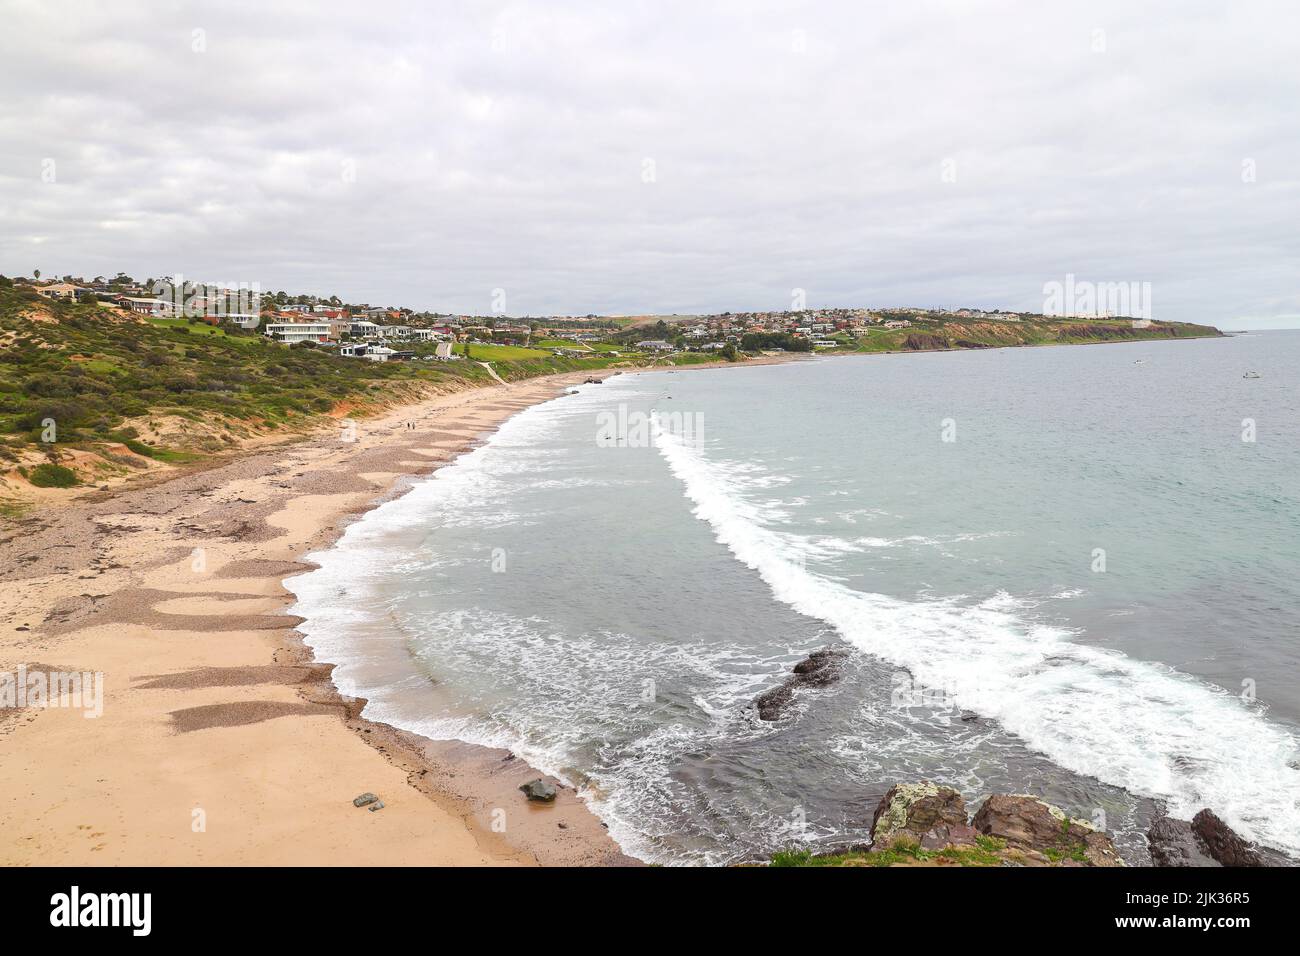 View of the sea and beach from lookout point at Hallet Cove in South Australia Stock Photo